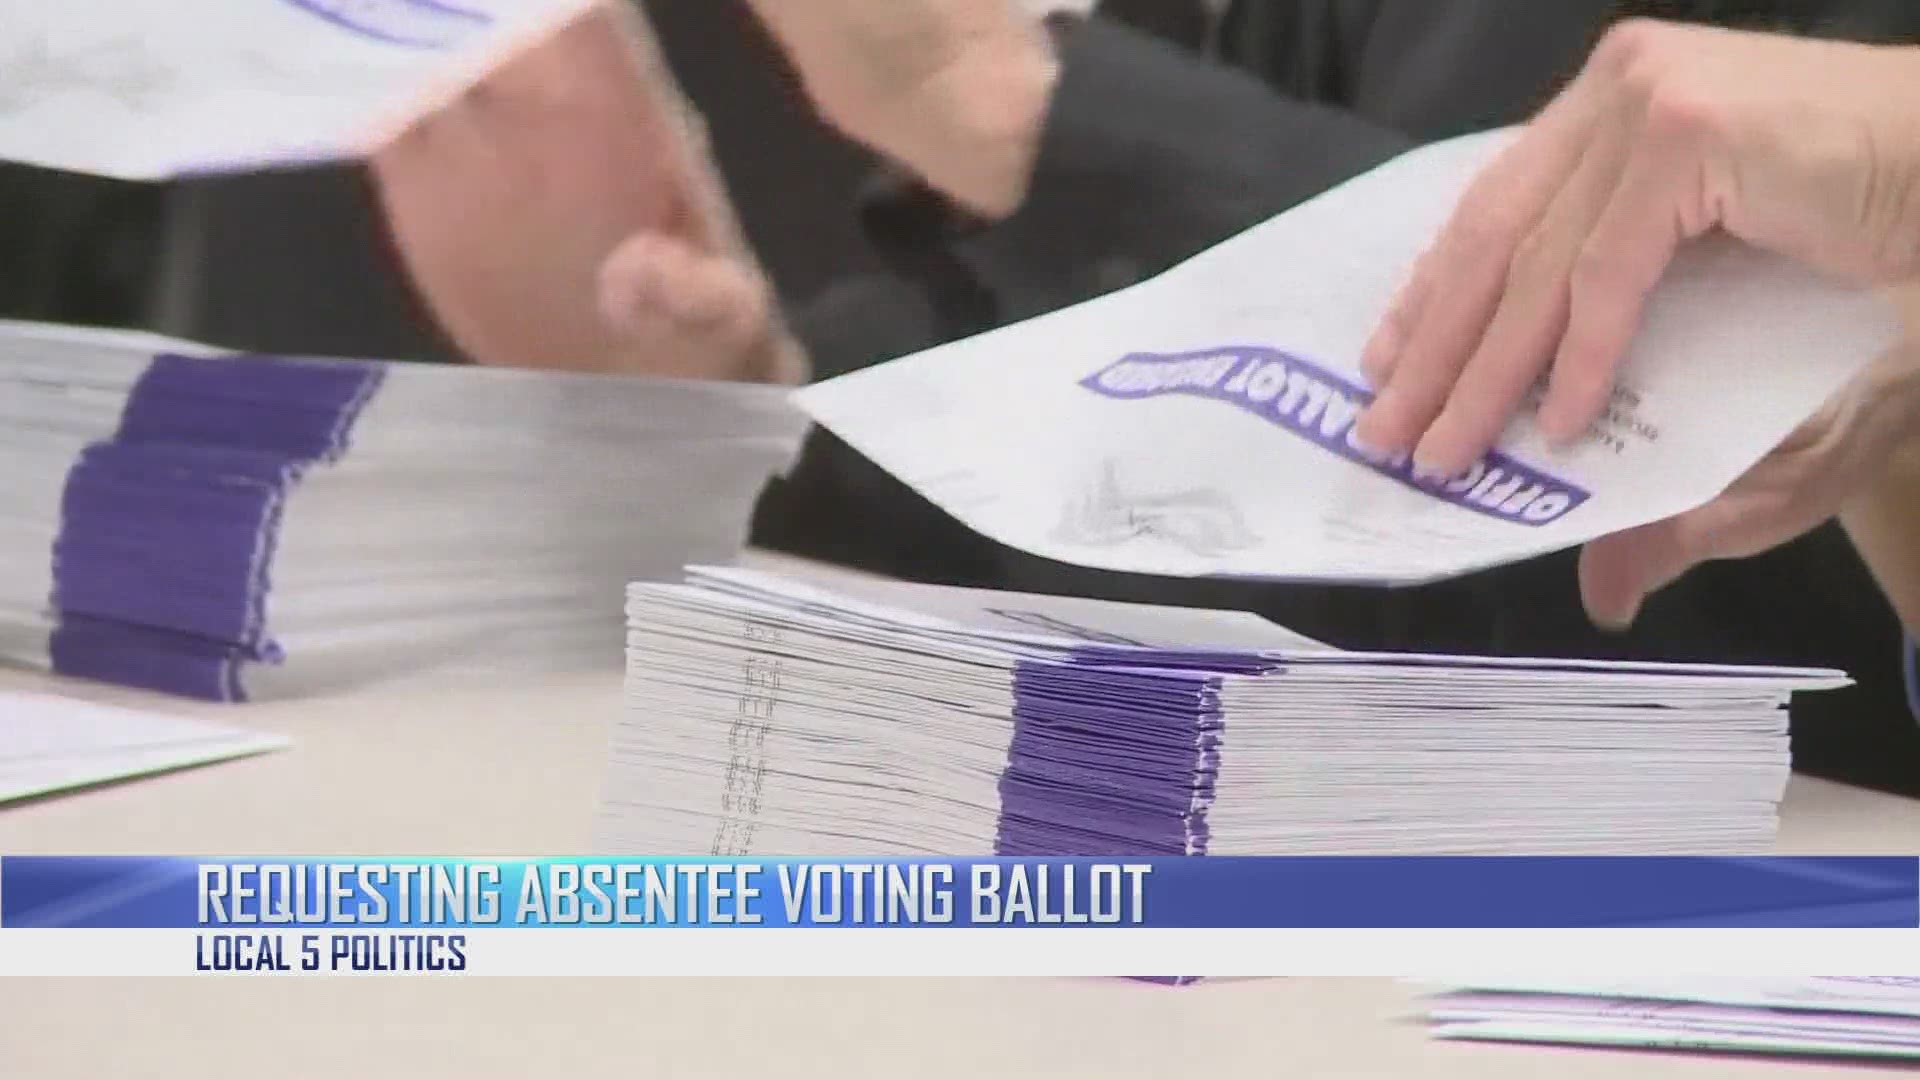 First day for requesting absentee voting ballots